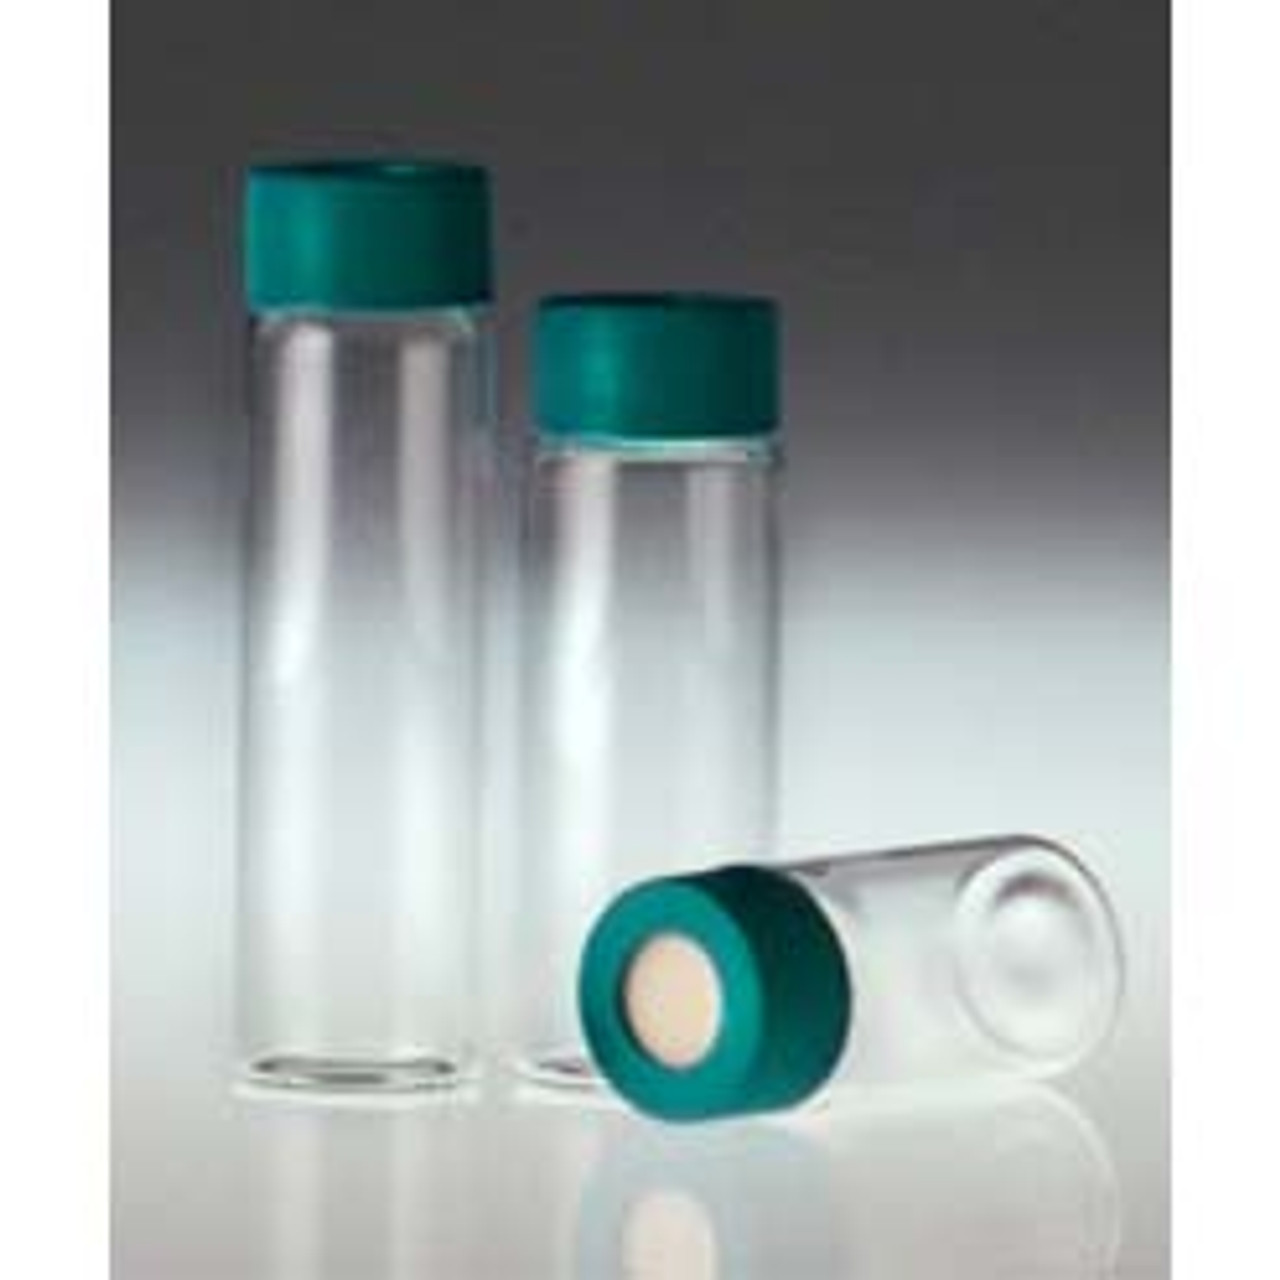 15 dram Clear Glass Vial with 24-410 Hole Cap15 dram Clear Glass Vial with 24-410 Hole Cap